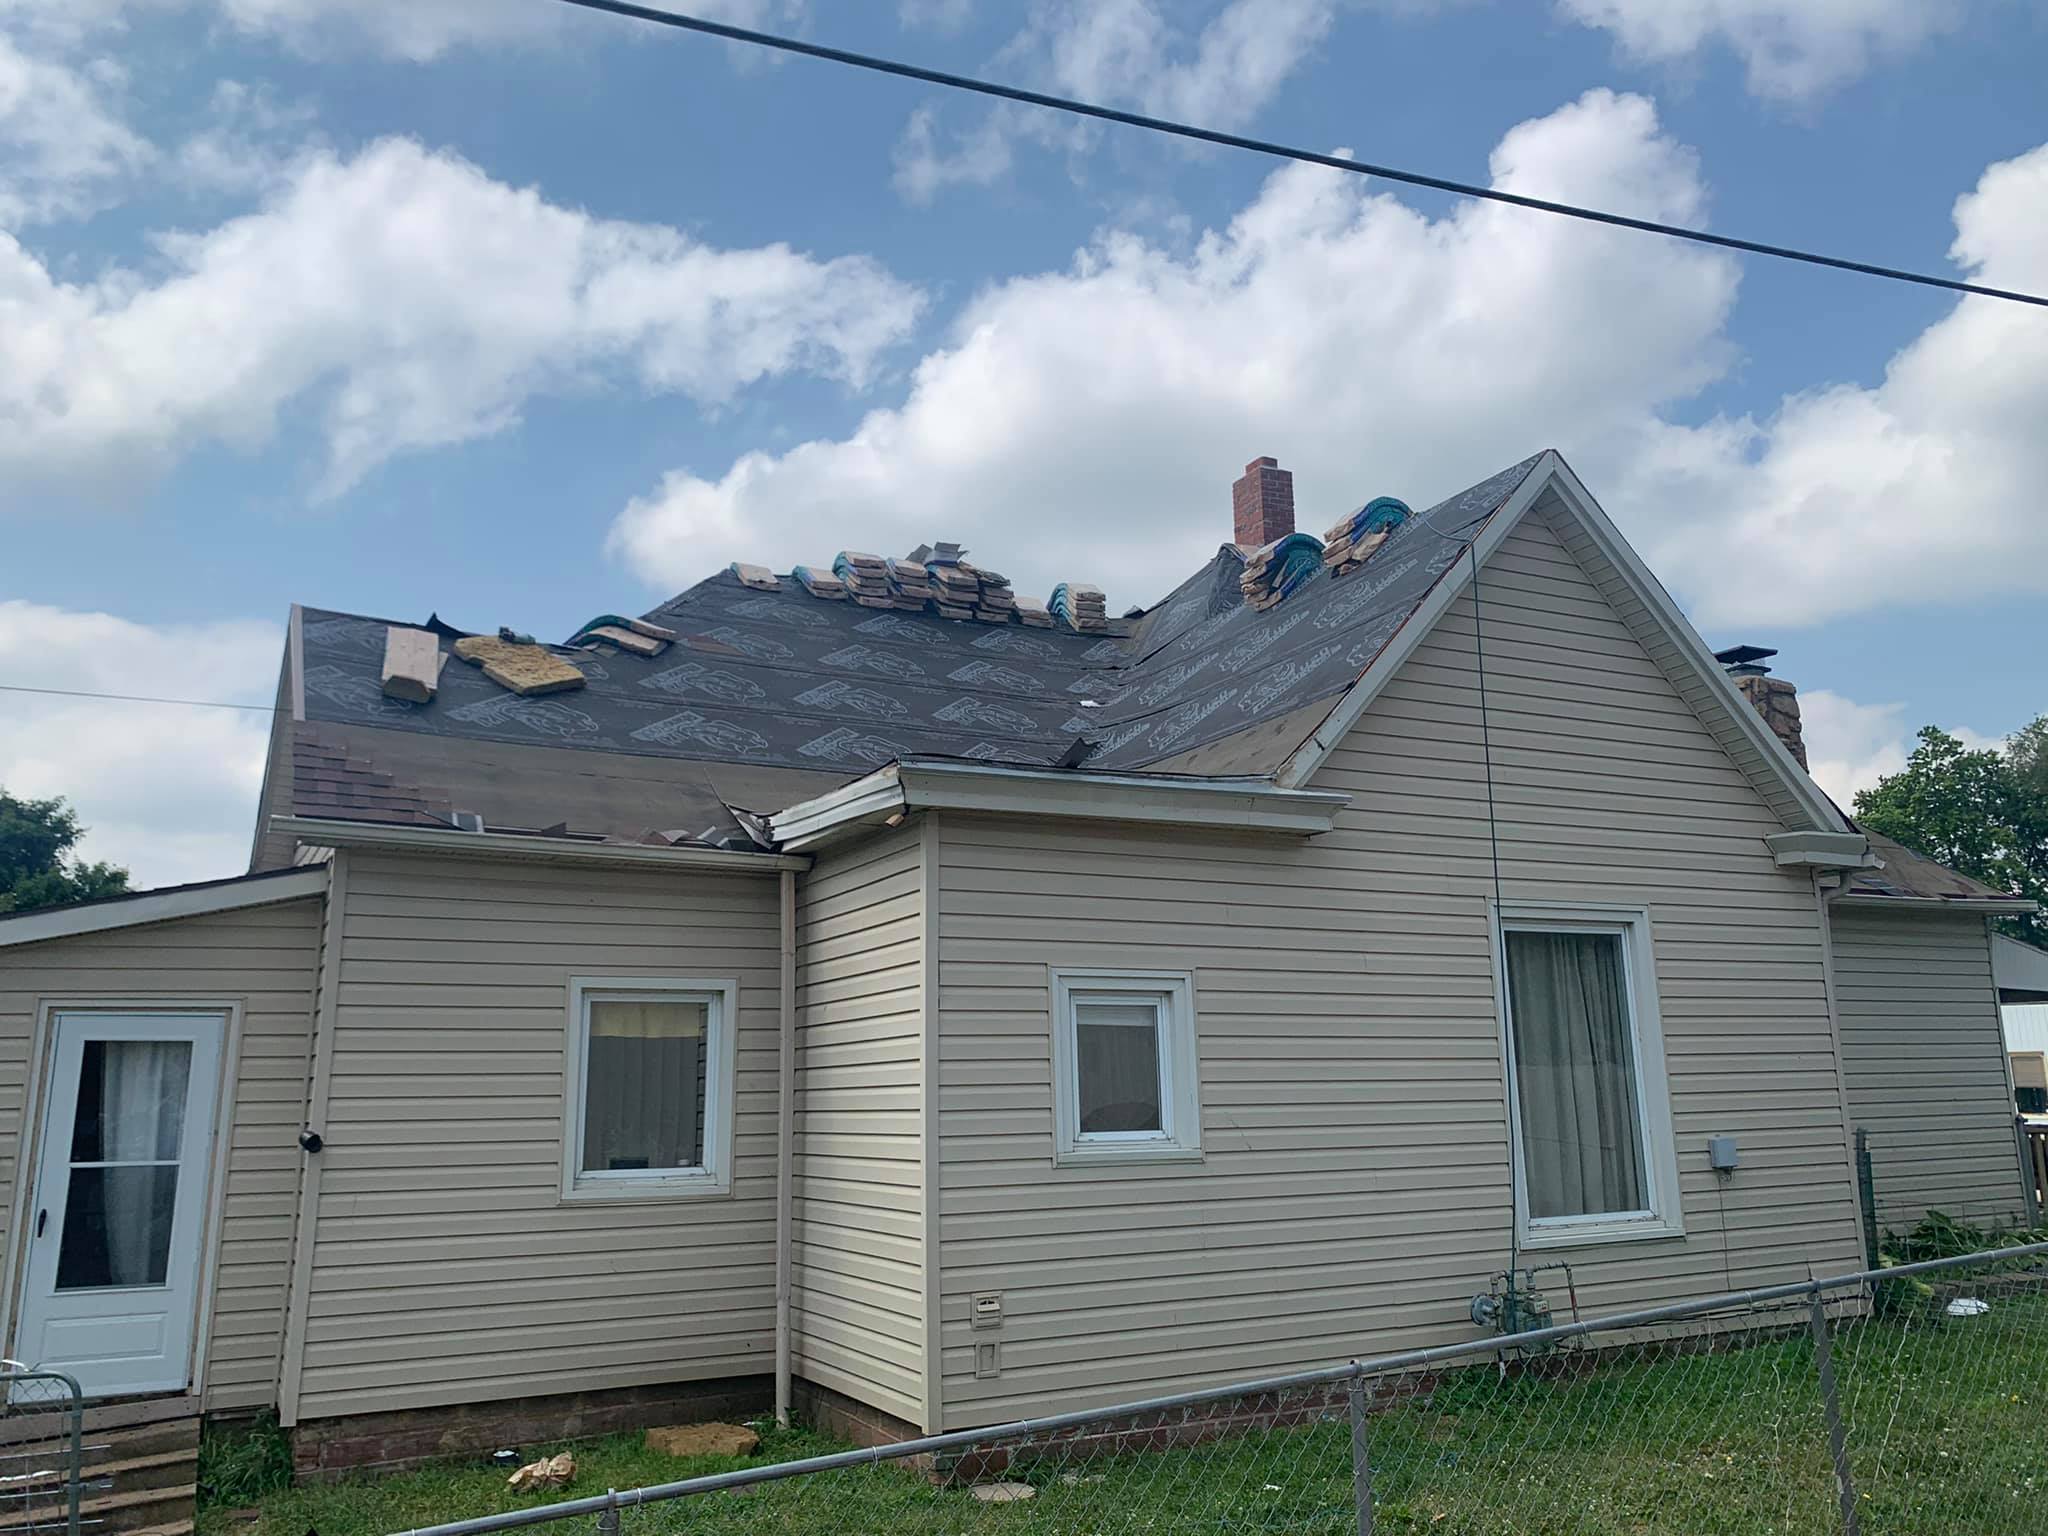 Roofing Companies Near Excelsior Springs Missouri - Tips For Negotiating Cost With